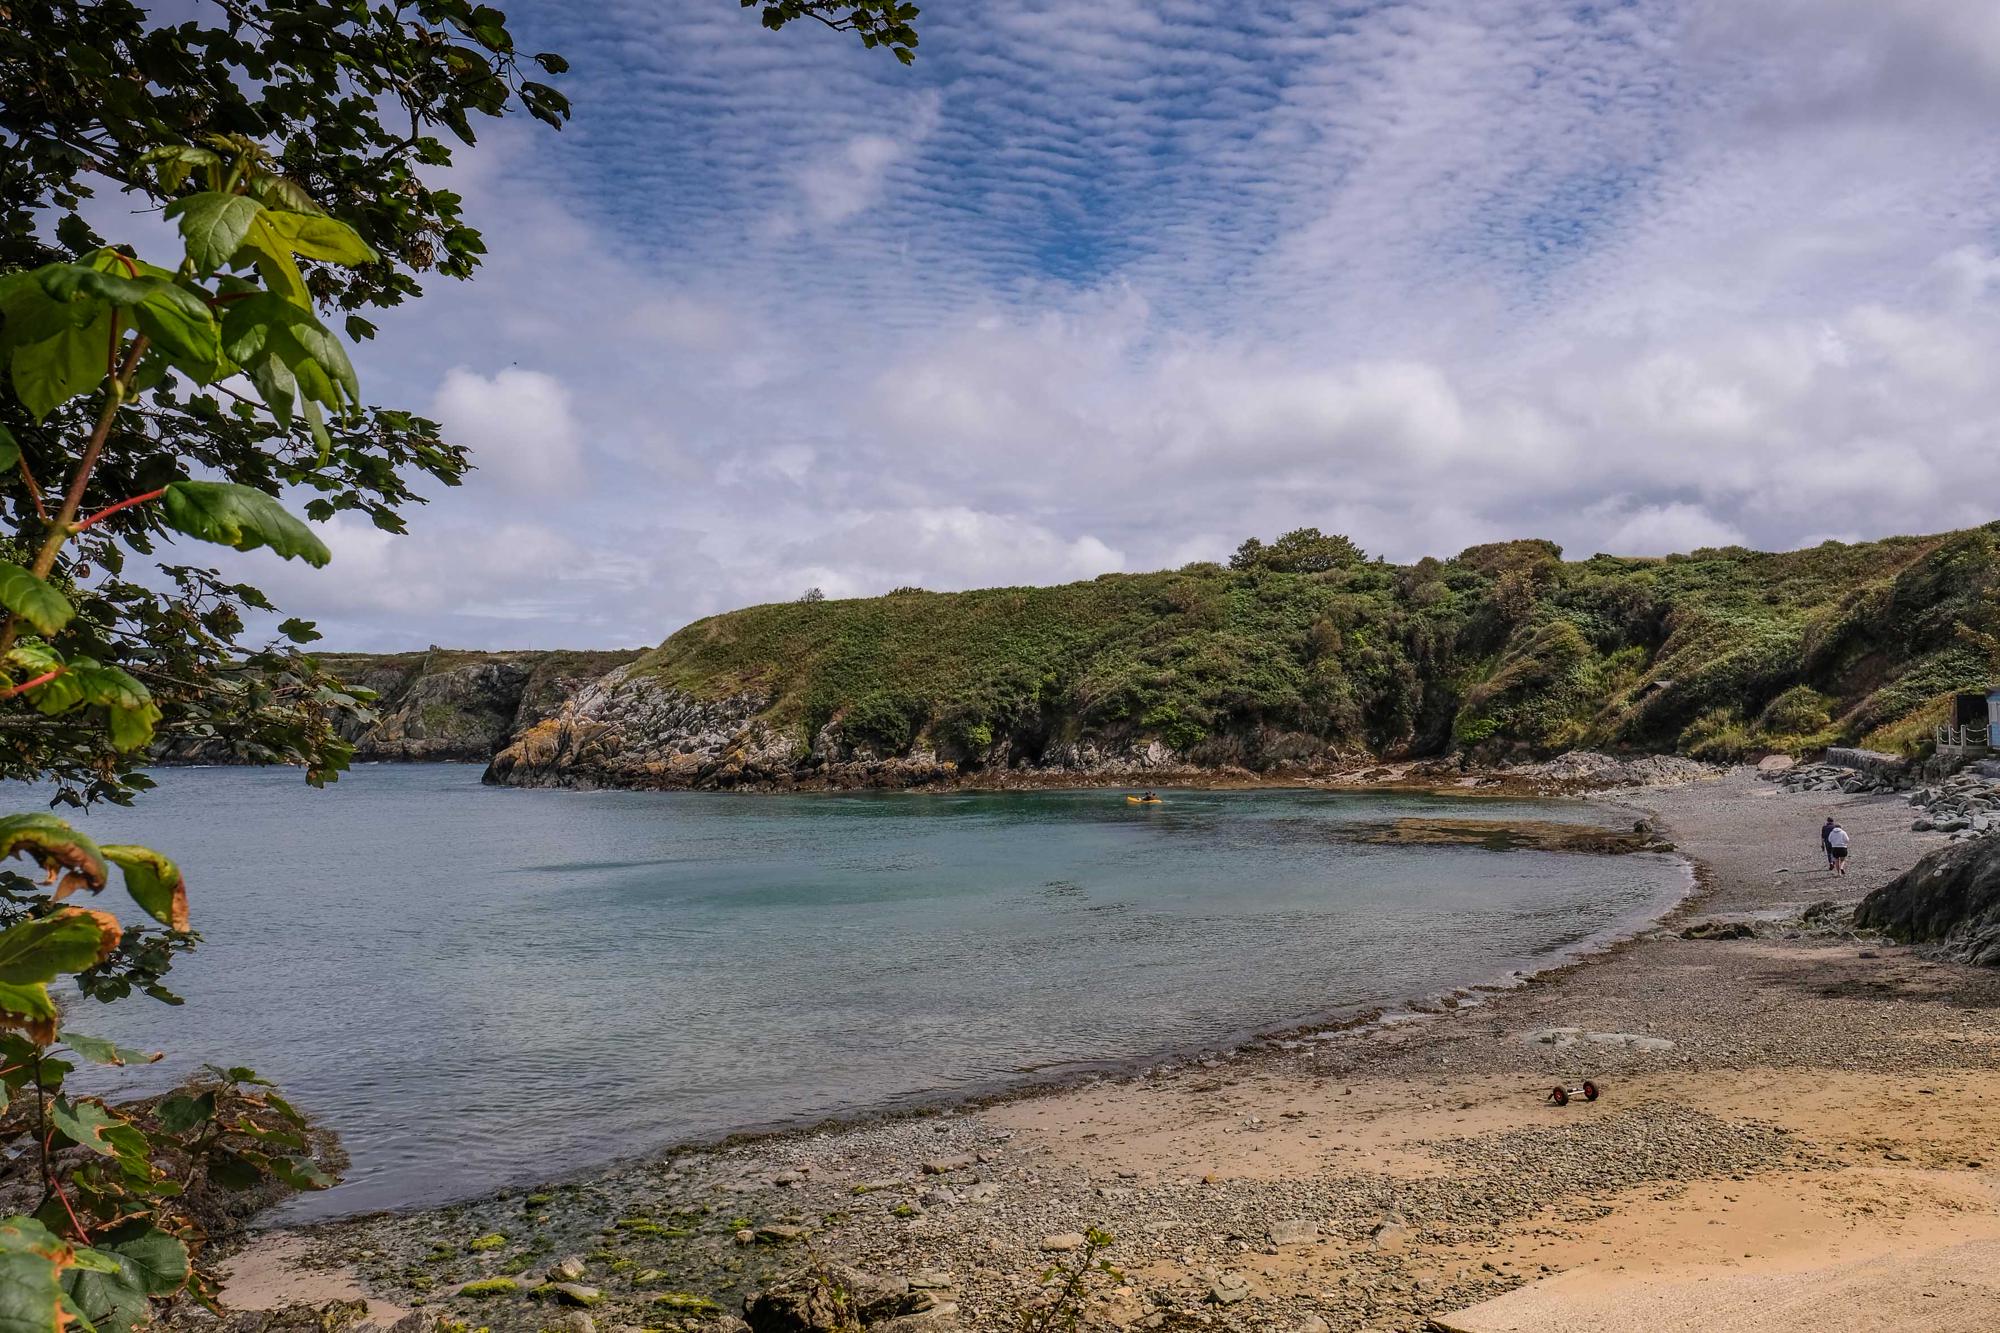 Hotels, Cottages, B&Bs & Glamping in Anglesey